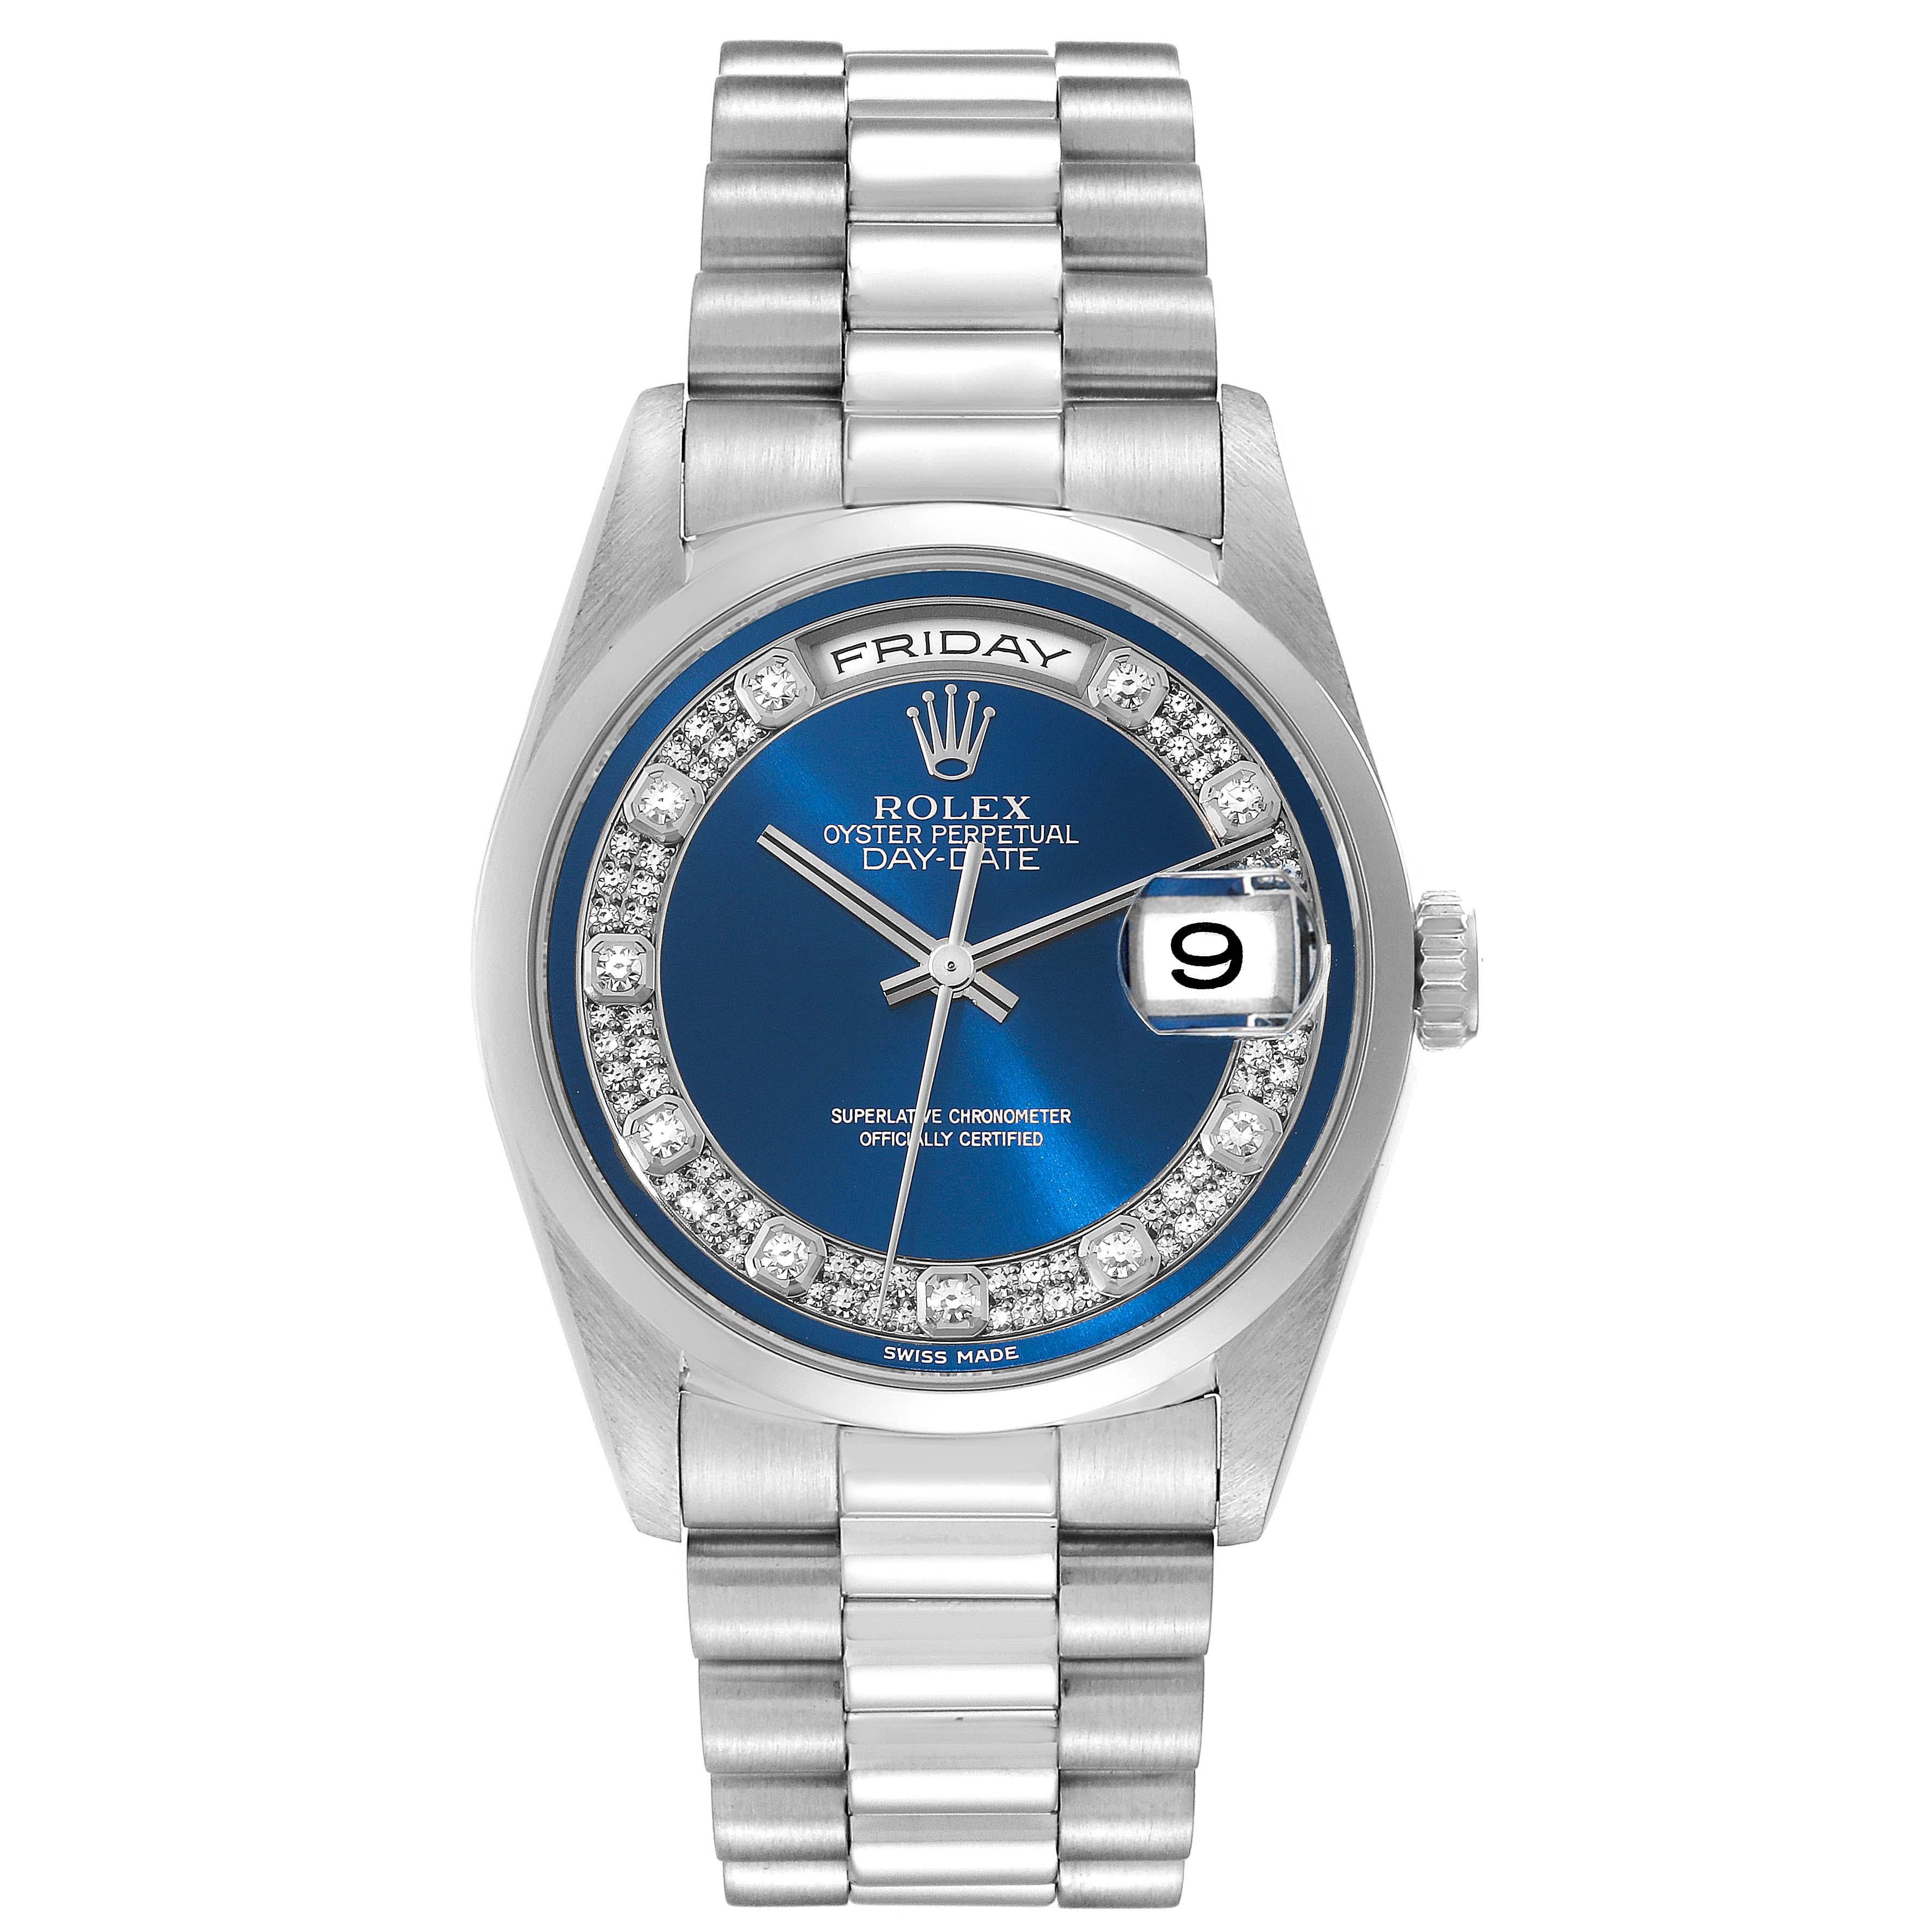 Rolex President Day-Date Platinum Blue Diamond Dial Mens Watch 18206 Box Papers. Officially certified chronometer self-winding movement with quickset date function. Platinum oyster case 36 mm in diameter. Rolex logo on a crown. Platinum smooth domed